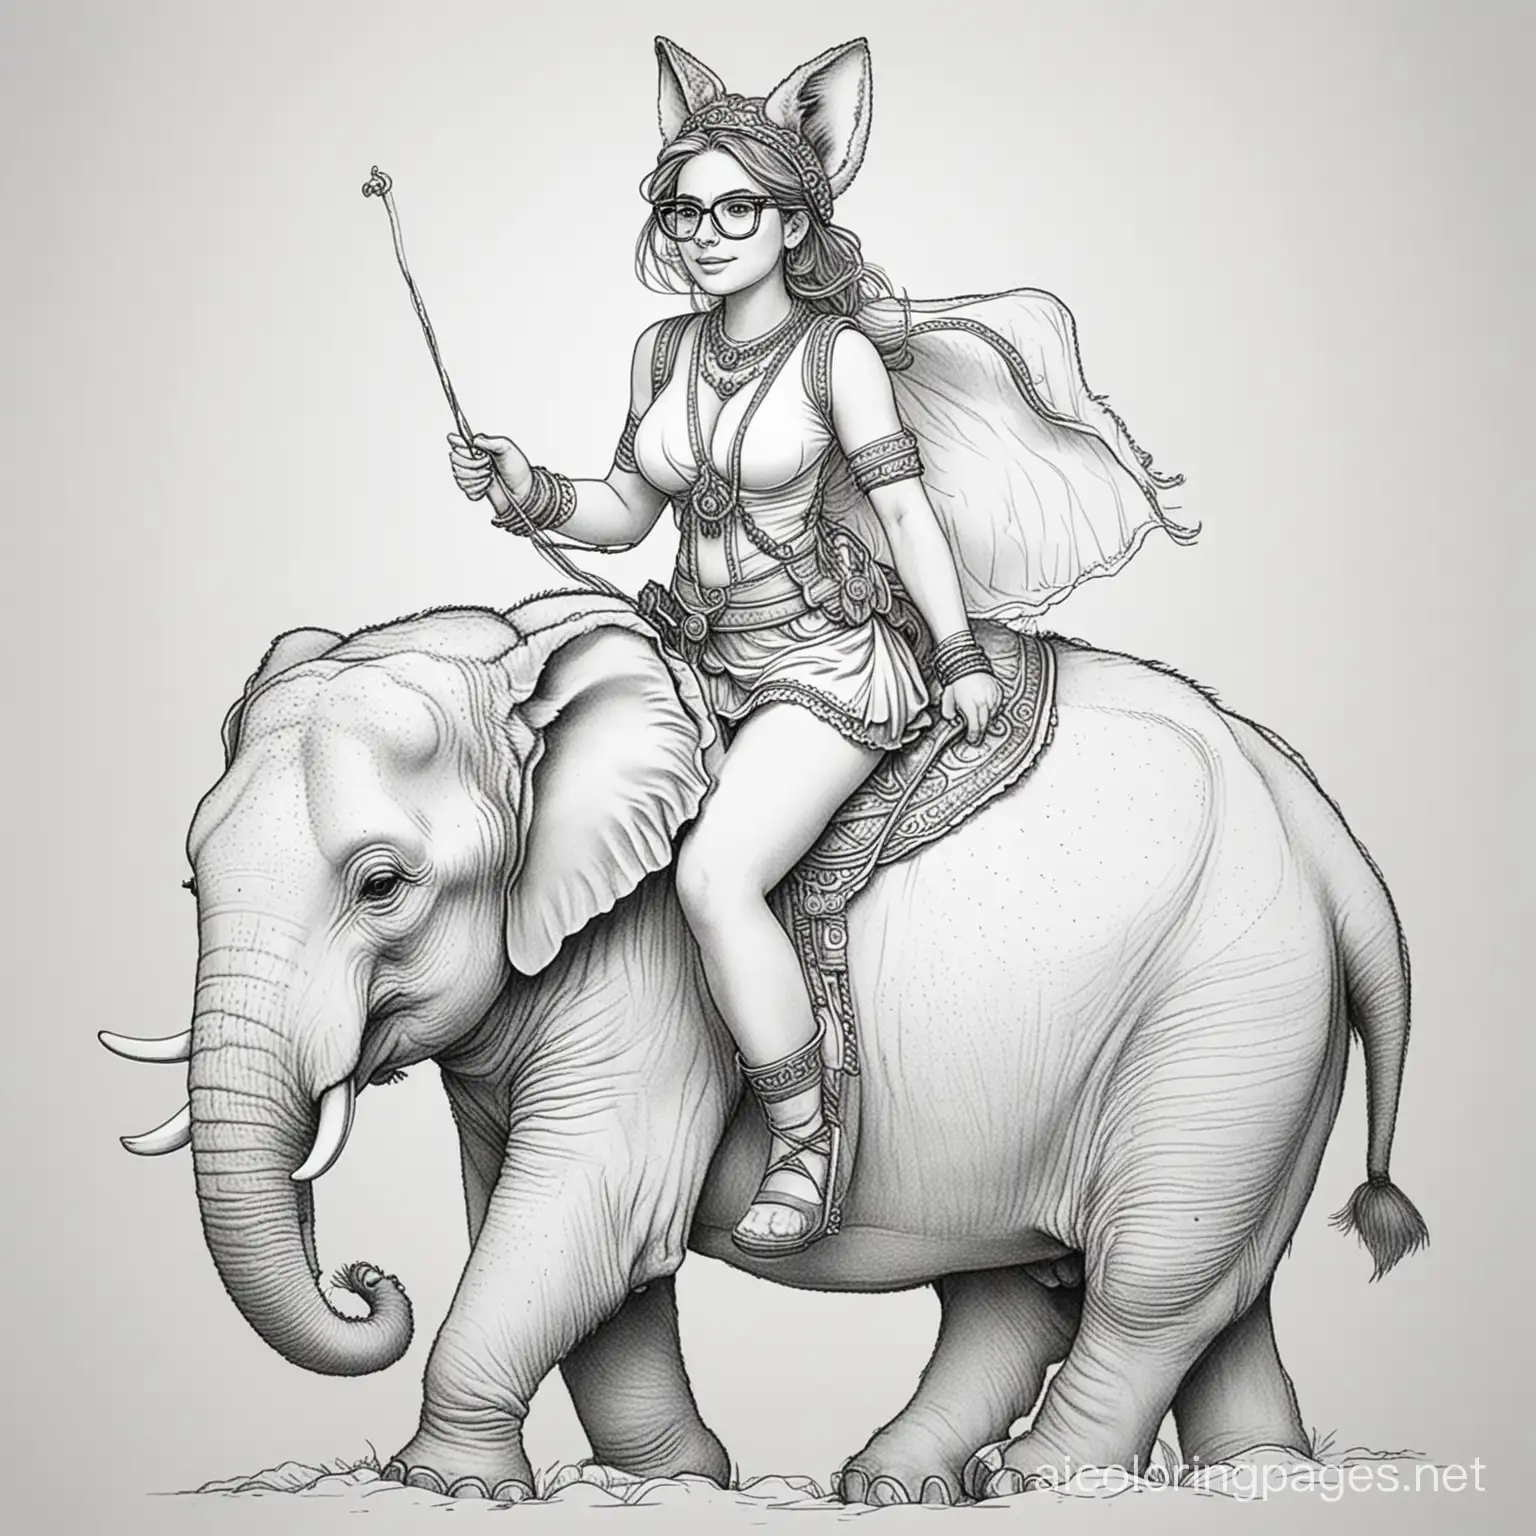 FoxEared-Woman-Riding-Elephant-Coloring-Page